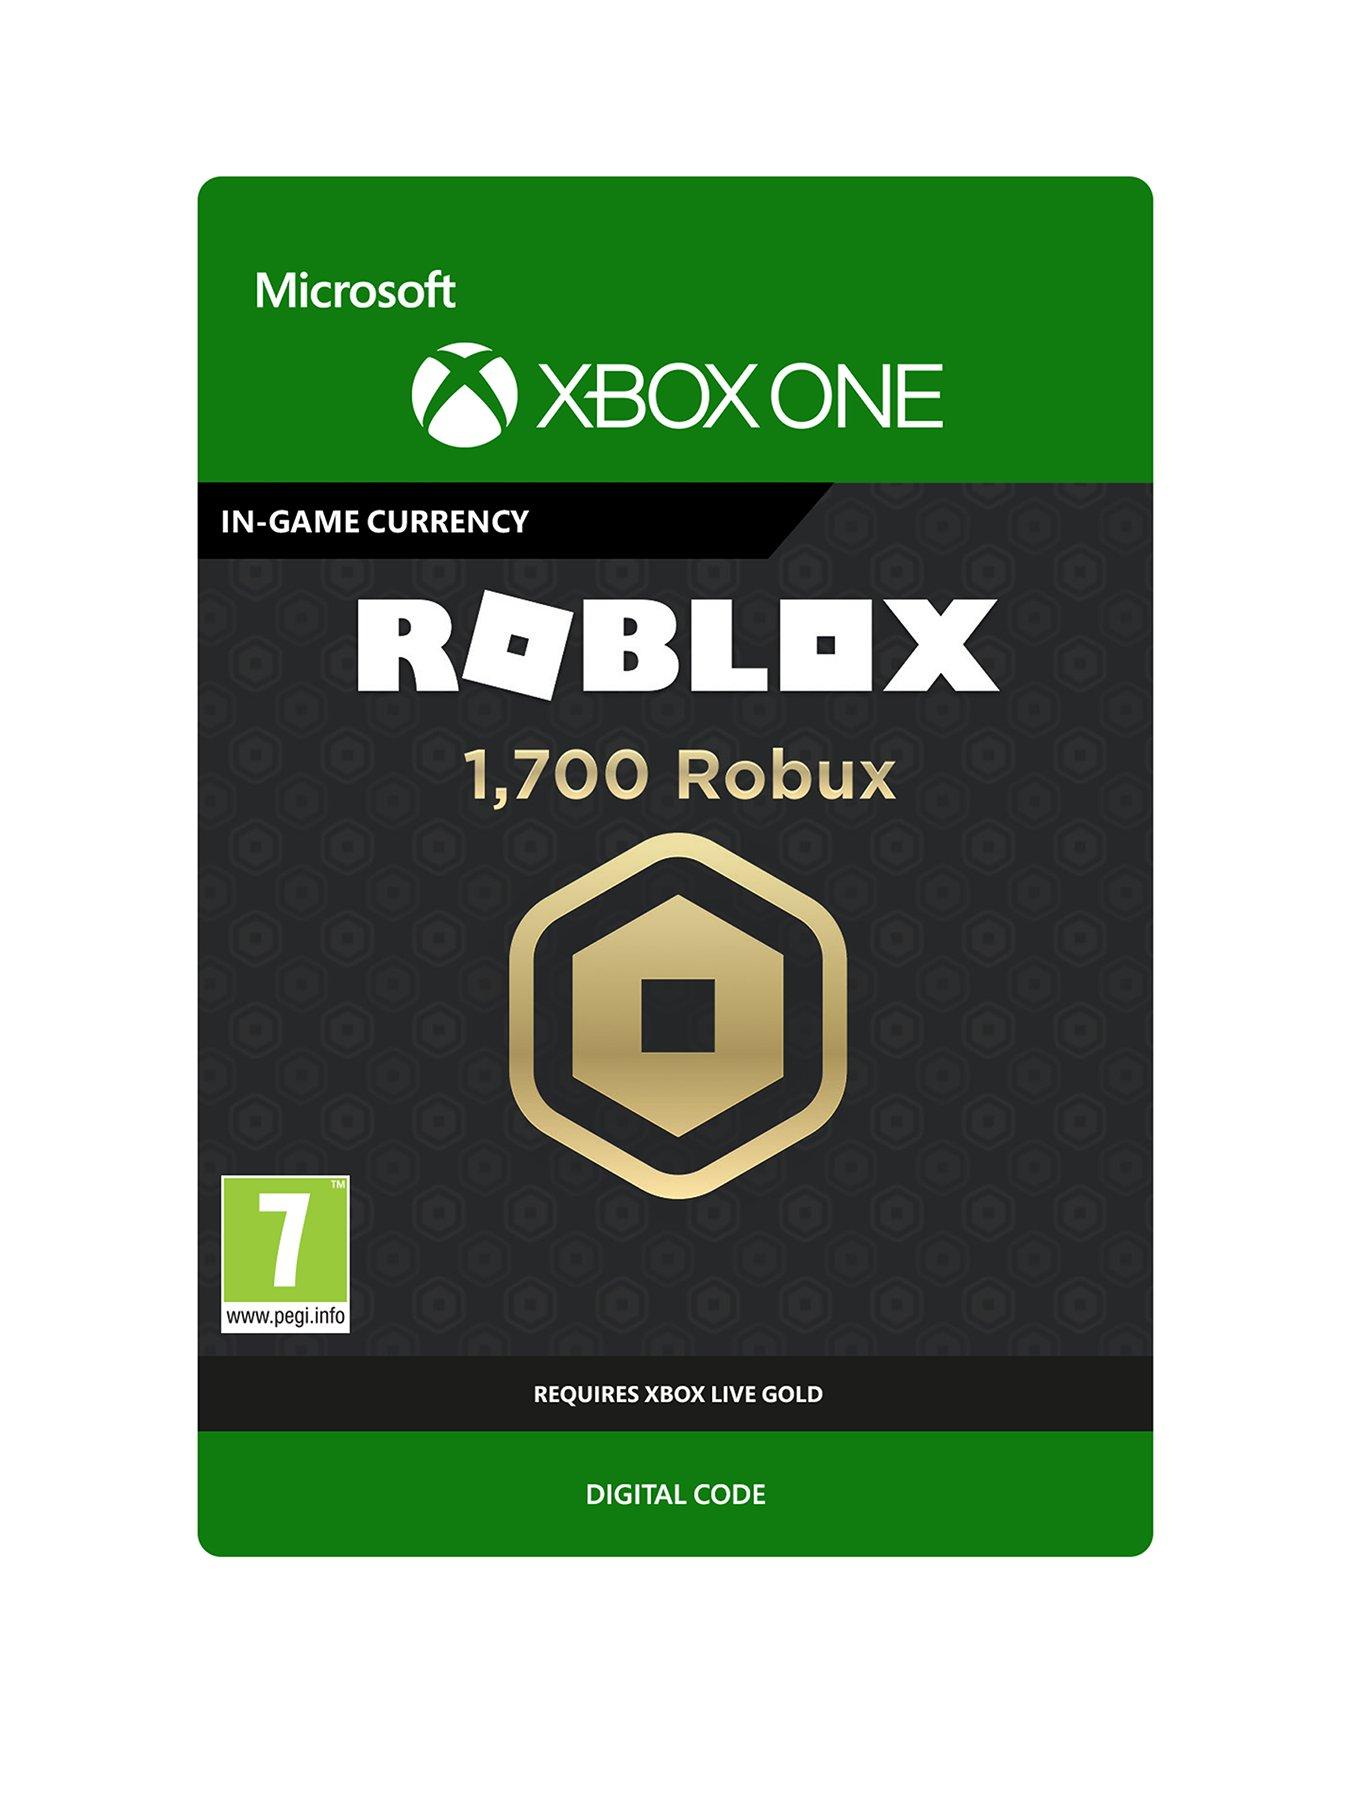 Digital Games Latest Digital Download Games Very Co Uk - roblox corporation video games retro game collection xbox